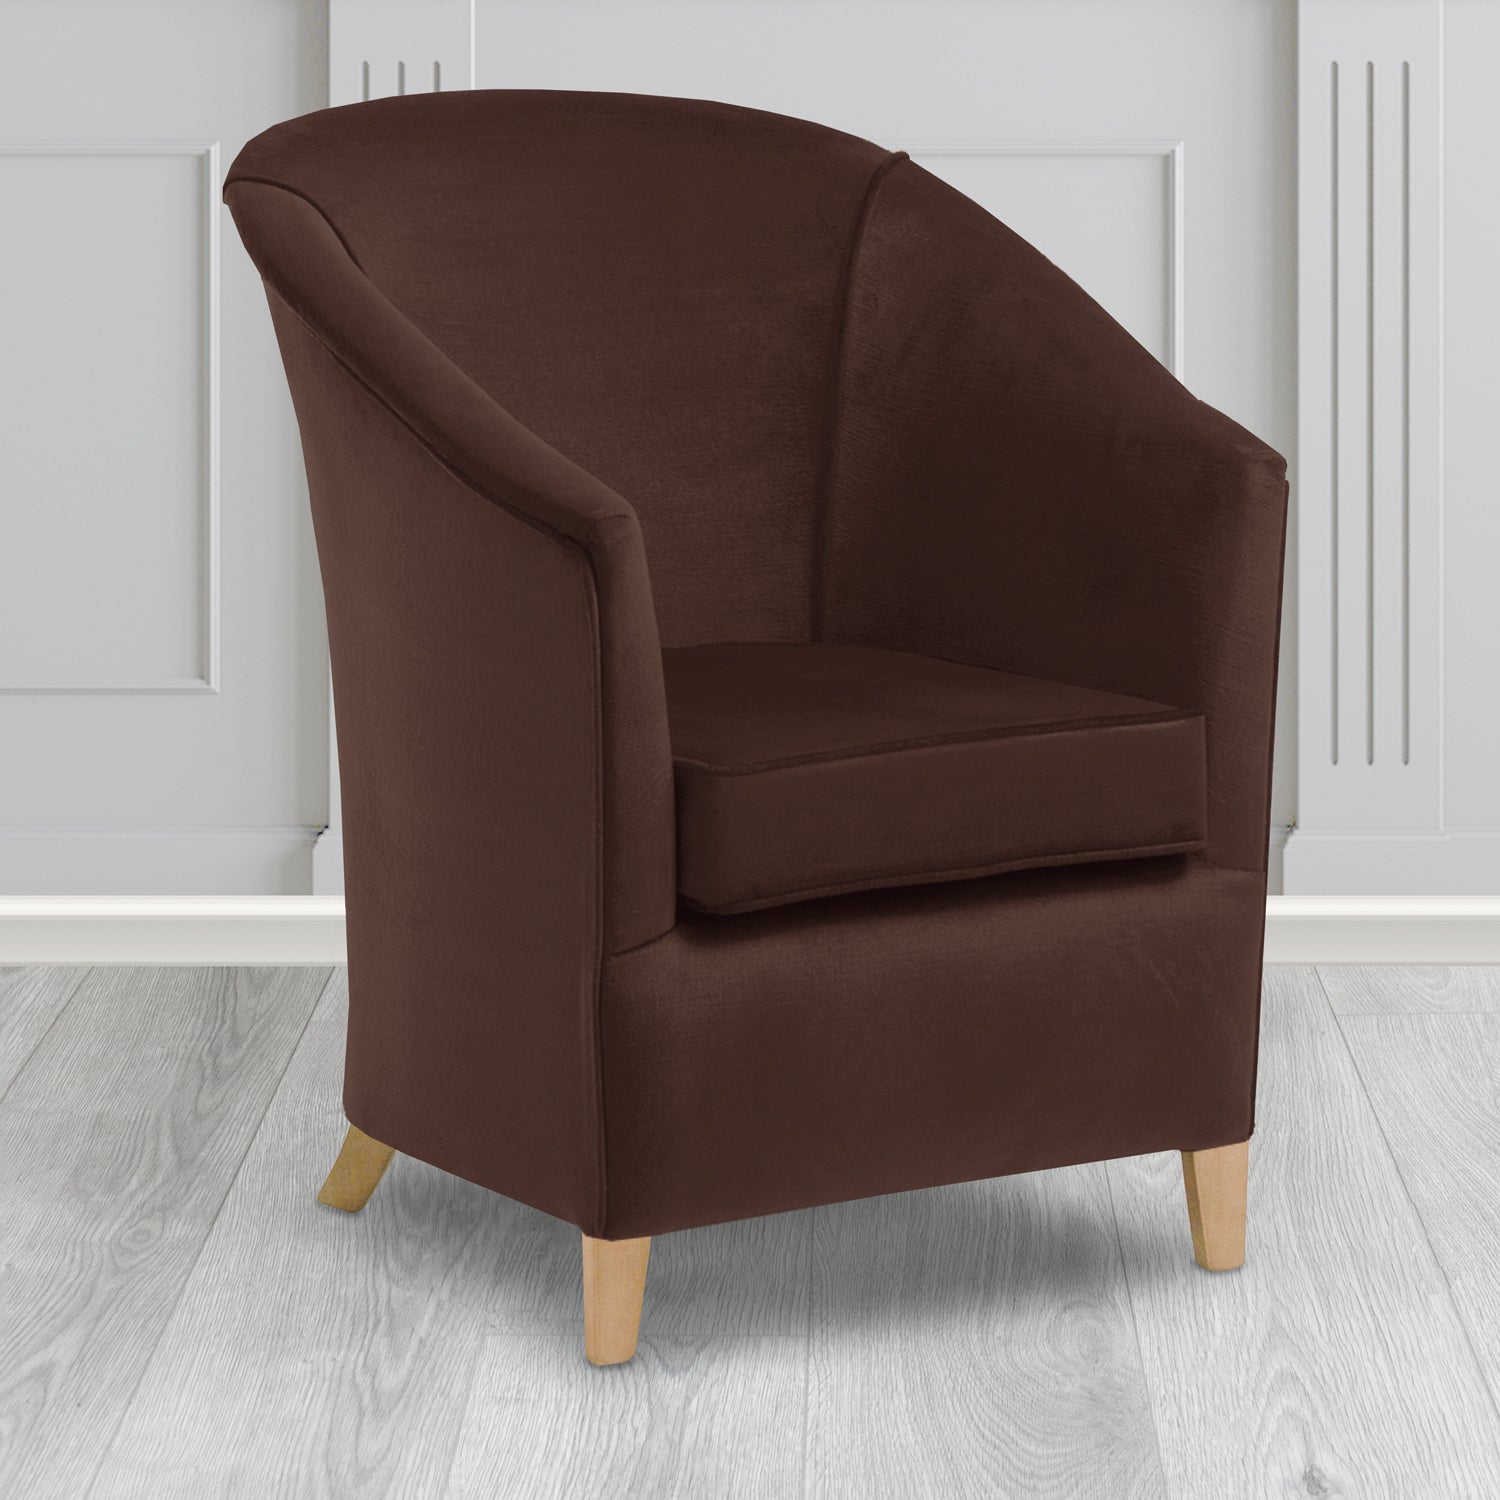 Bolton Tub Chair in Noble 702 Chocolate Crib 5 Velvet Fabric - Water Resistant - The Tub Chair Shop